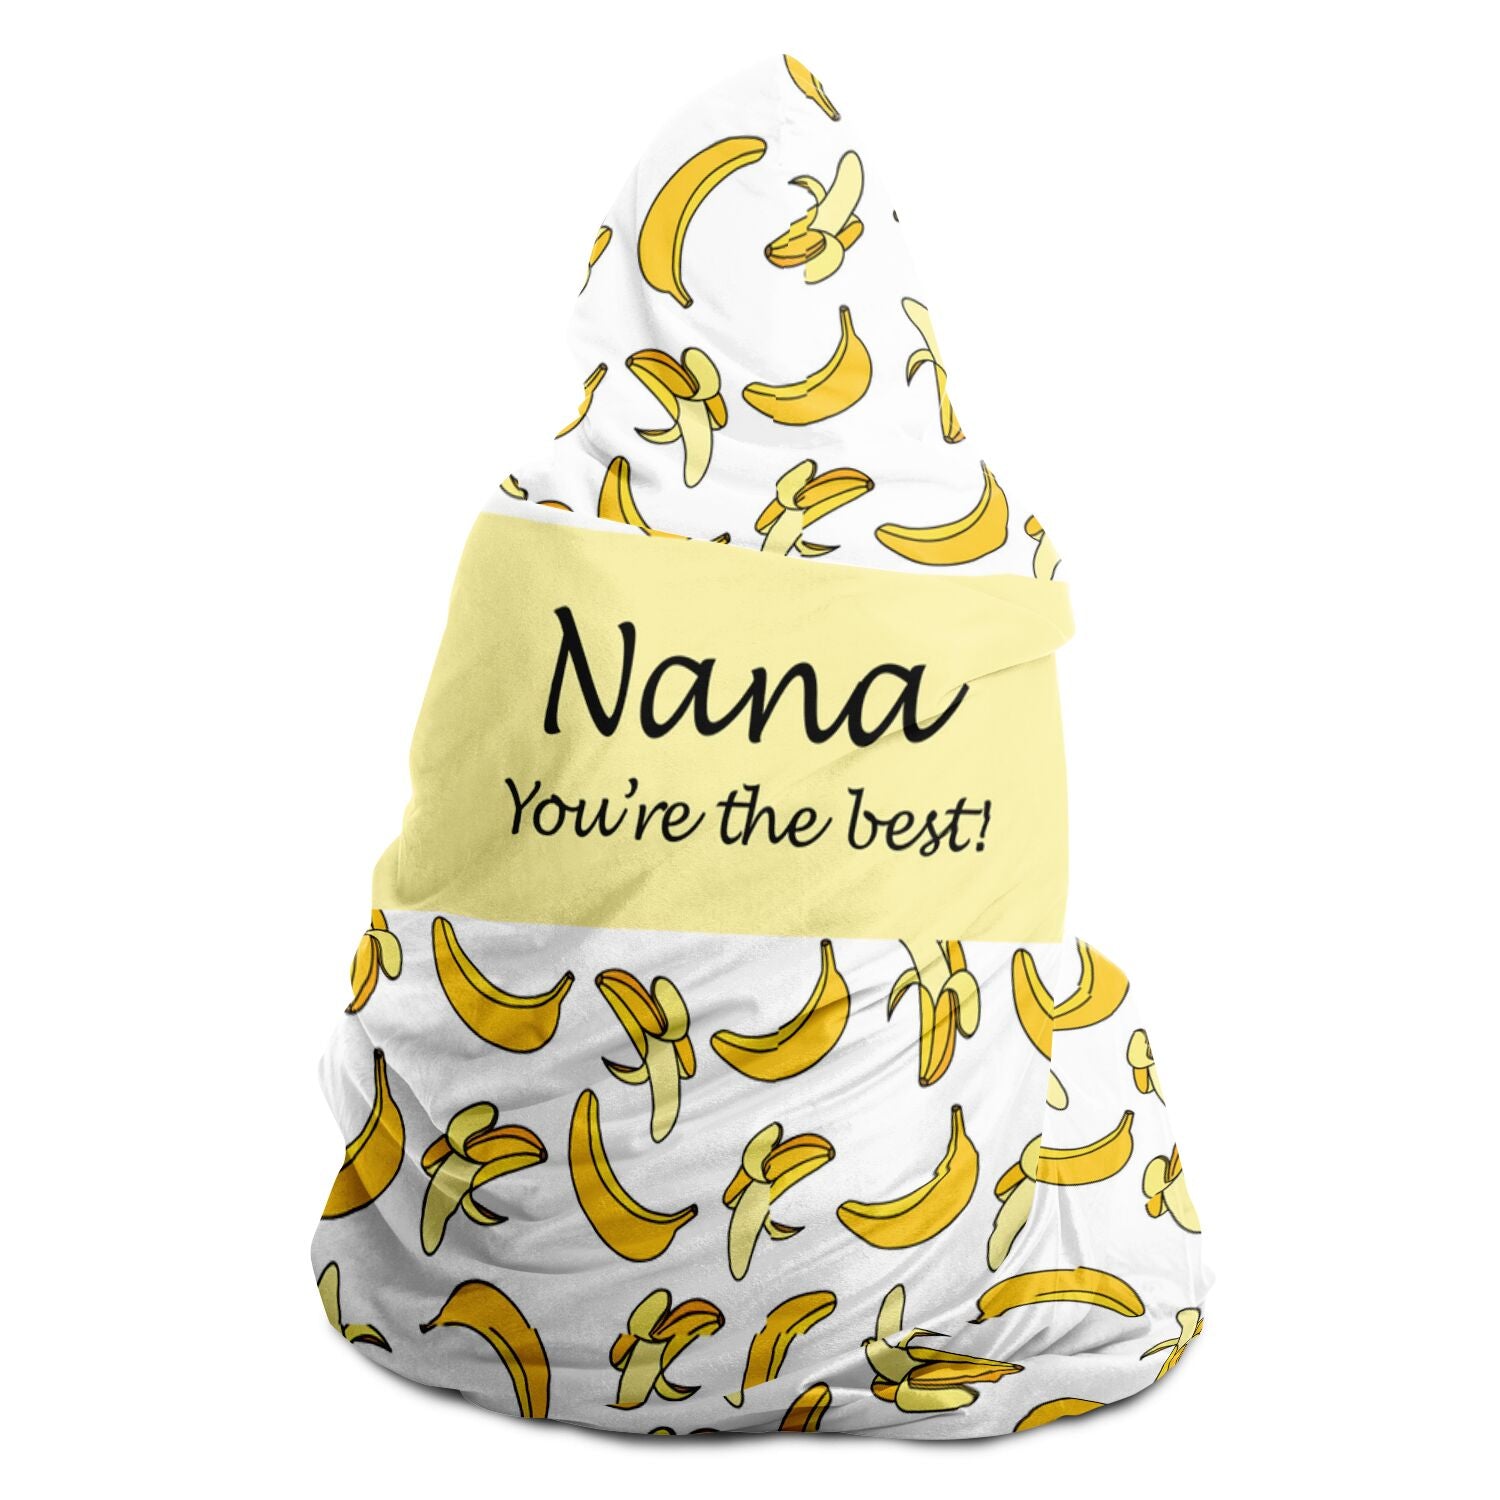 Nana, you're the best Subliminator Blanket Hoodie with Banana Pattern - Perfect Gift for Nana.